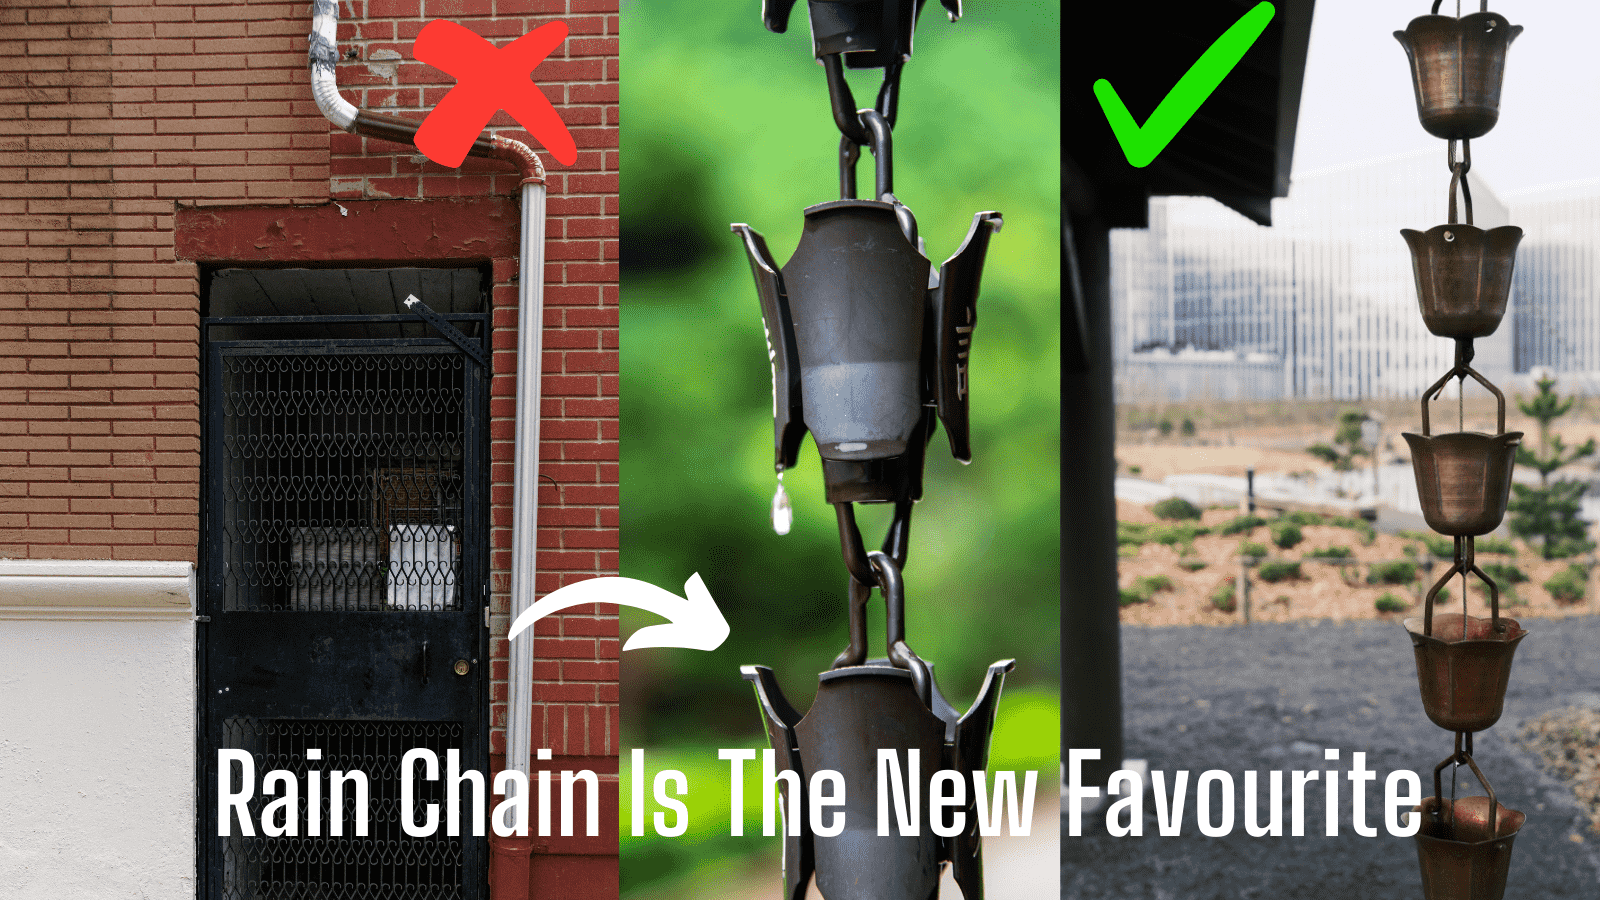 People Globally Are Choosing Rain Chain Over Downspout, 5 Reasons Why